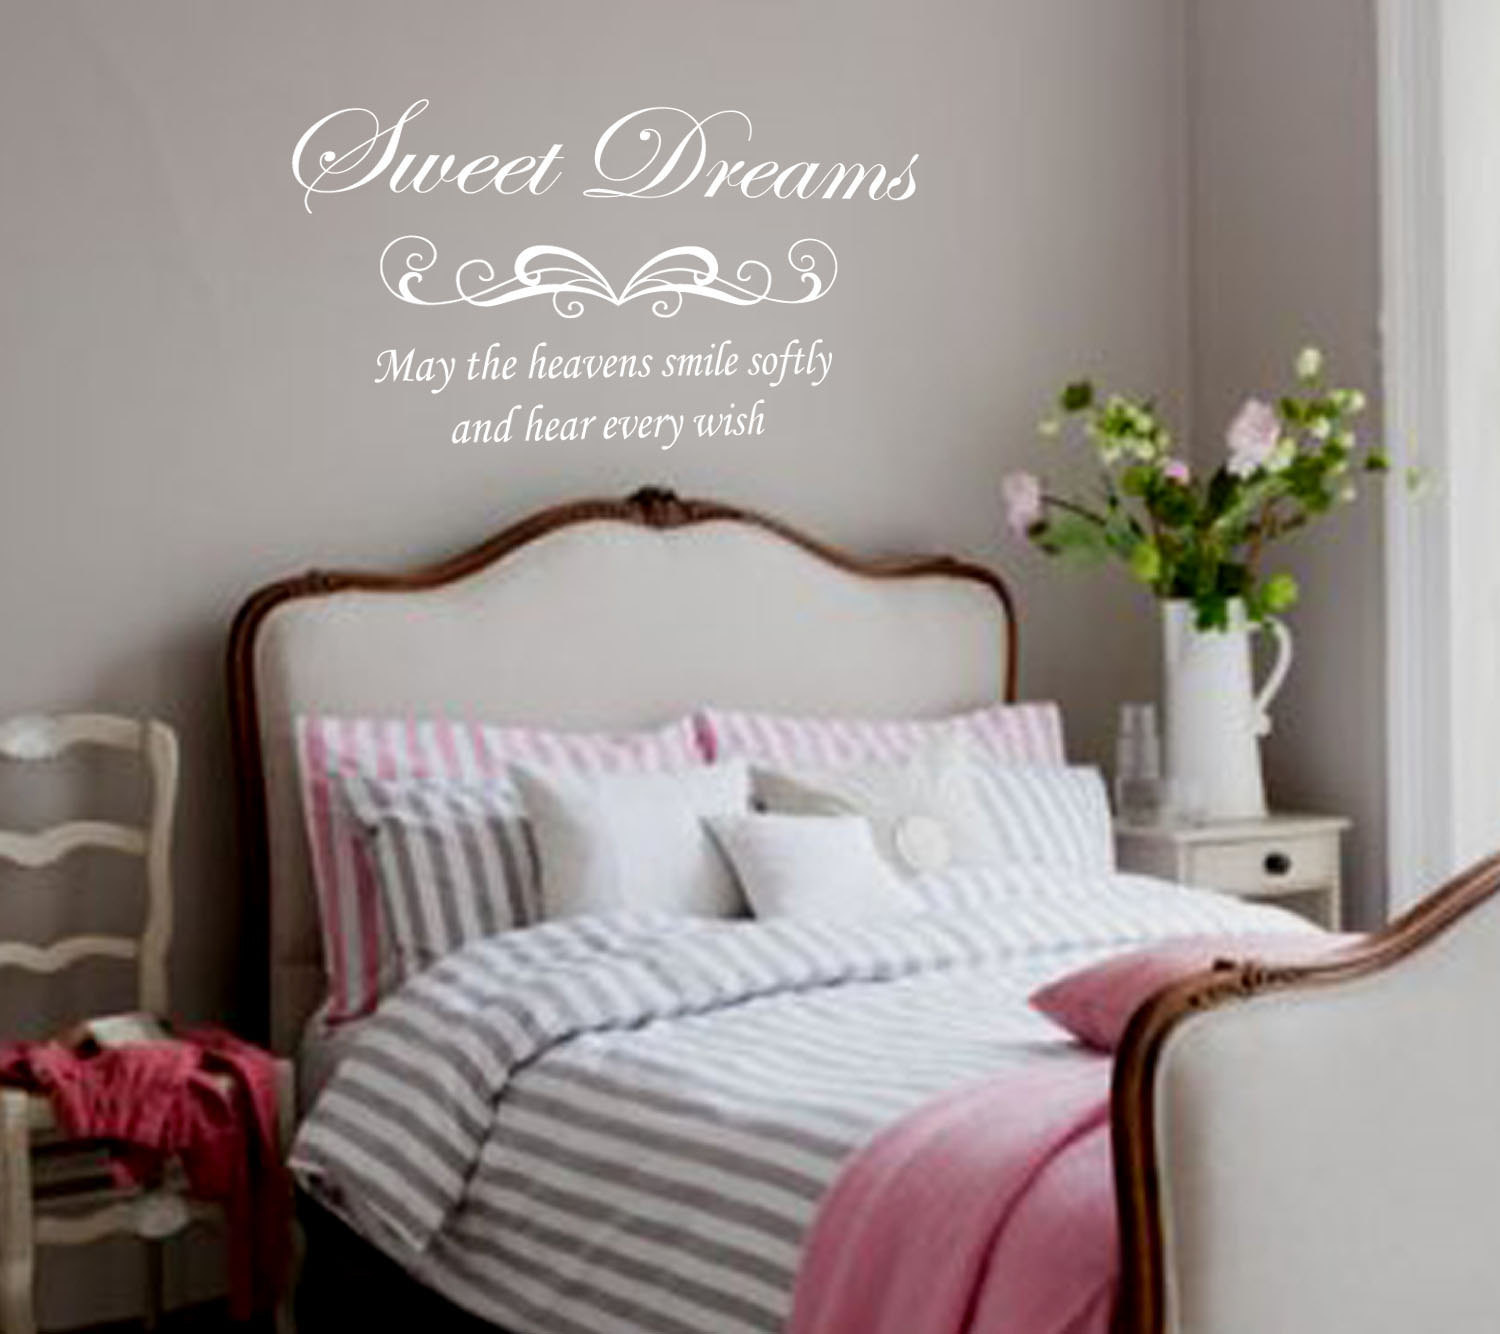 Bedroom Wall Decal
 Bedroom Wall Decal Sweet dreams Removable Vinyl Lettering